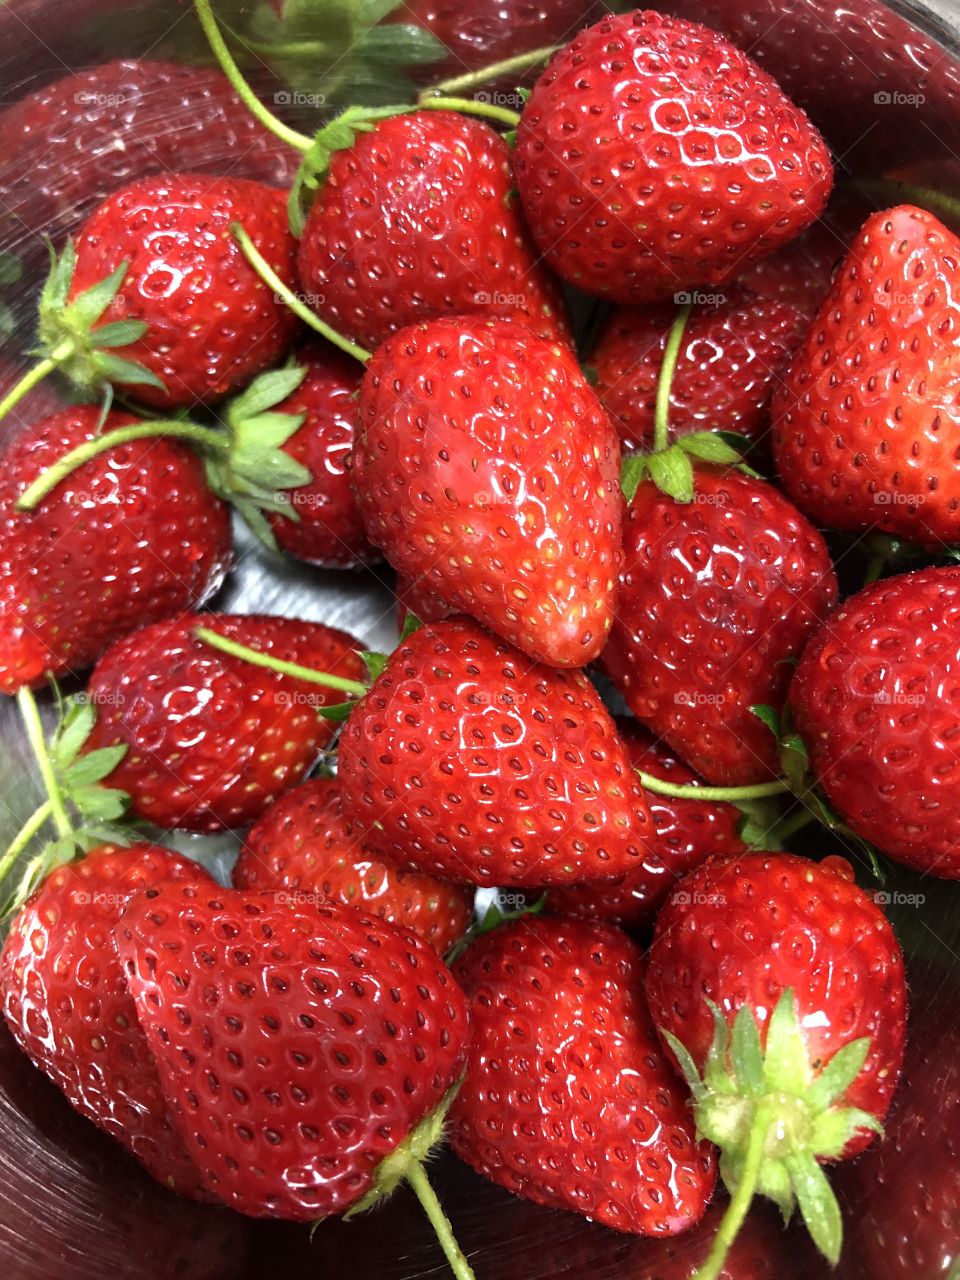 Perfect Japanese greenhouse grown strawberries